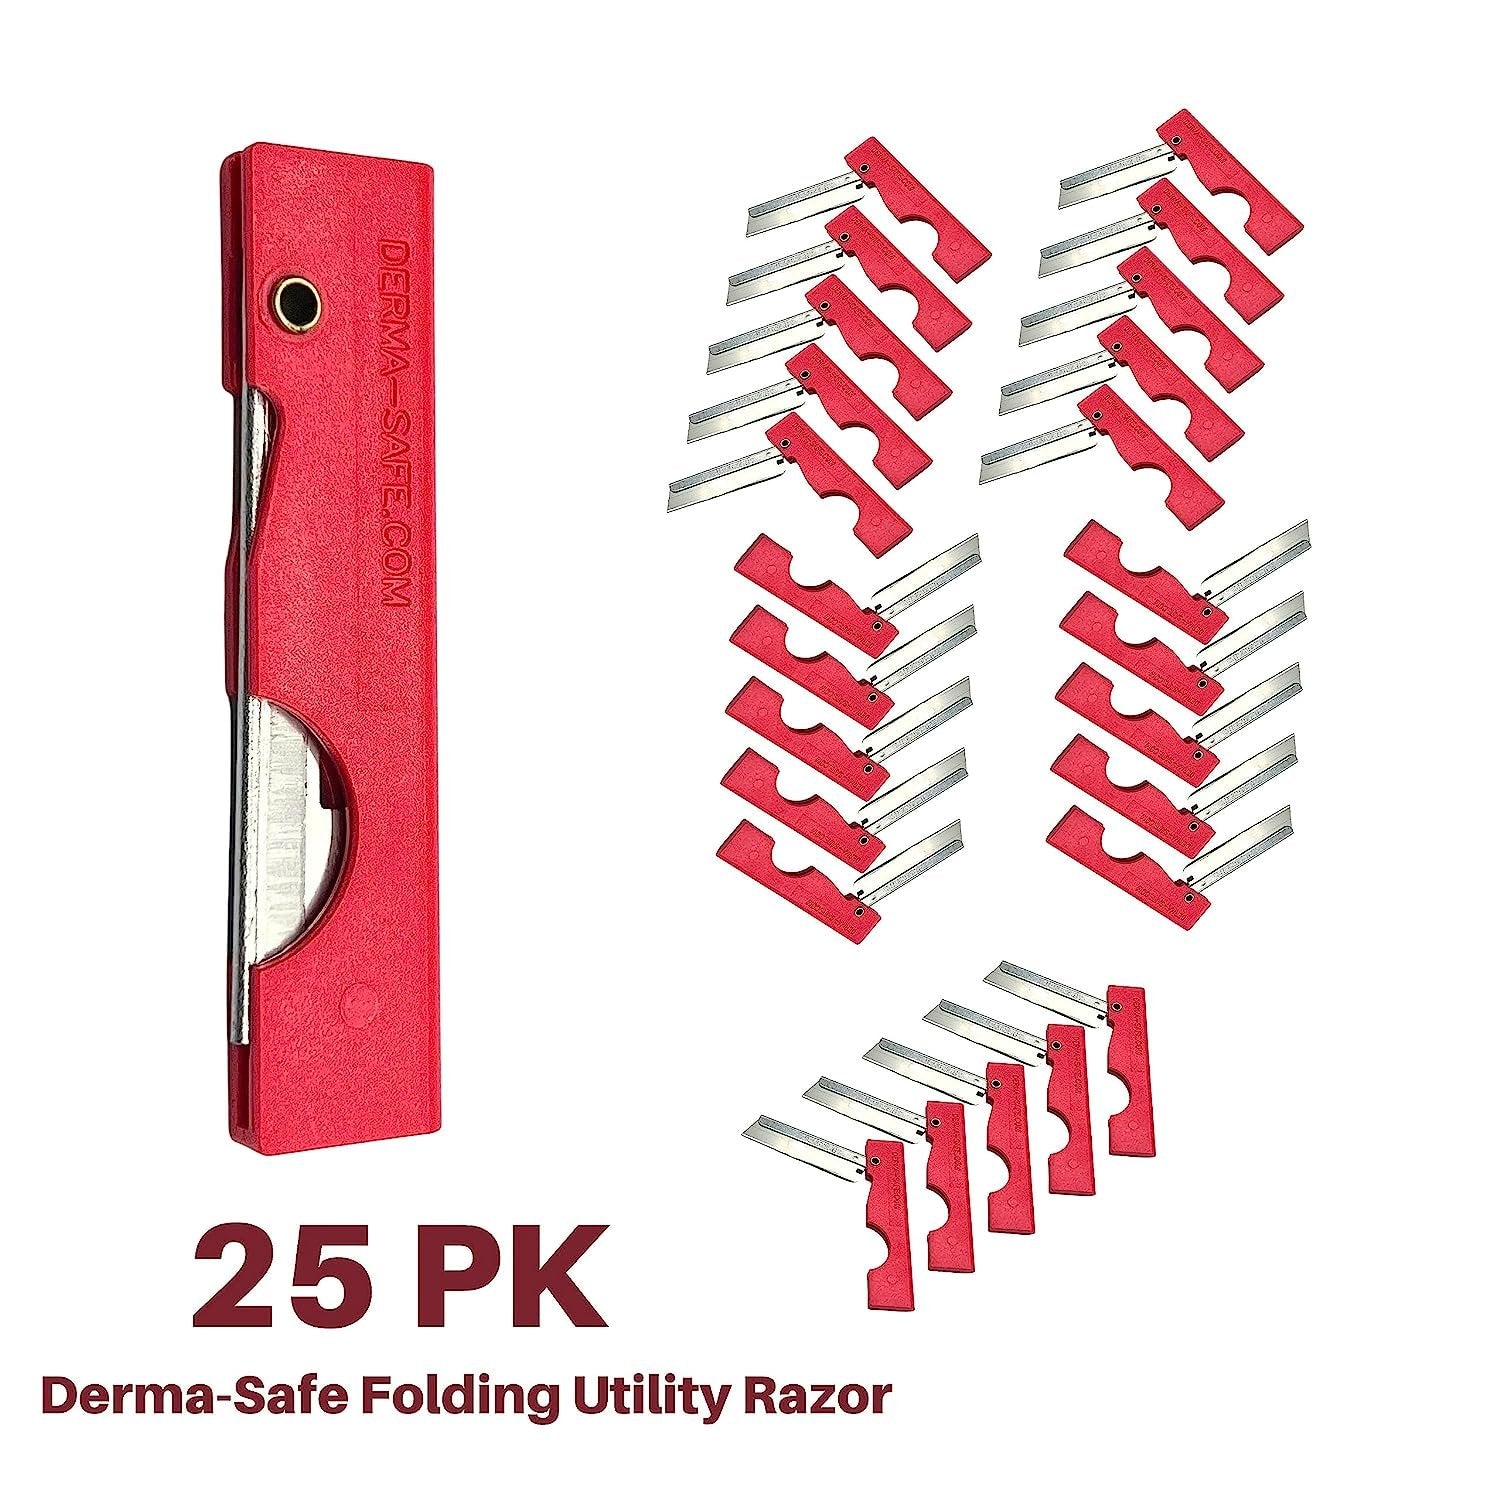 Derma-Safe Folding Utility Razor for Survival Utility and First Aid Kits - Mini Pocket Foldable Razor Blade, Folding Scalpel, (Red) 100-Pack